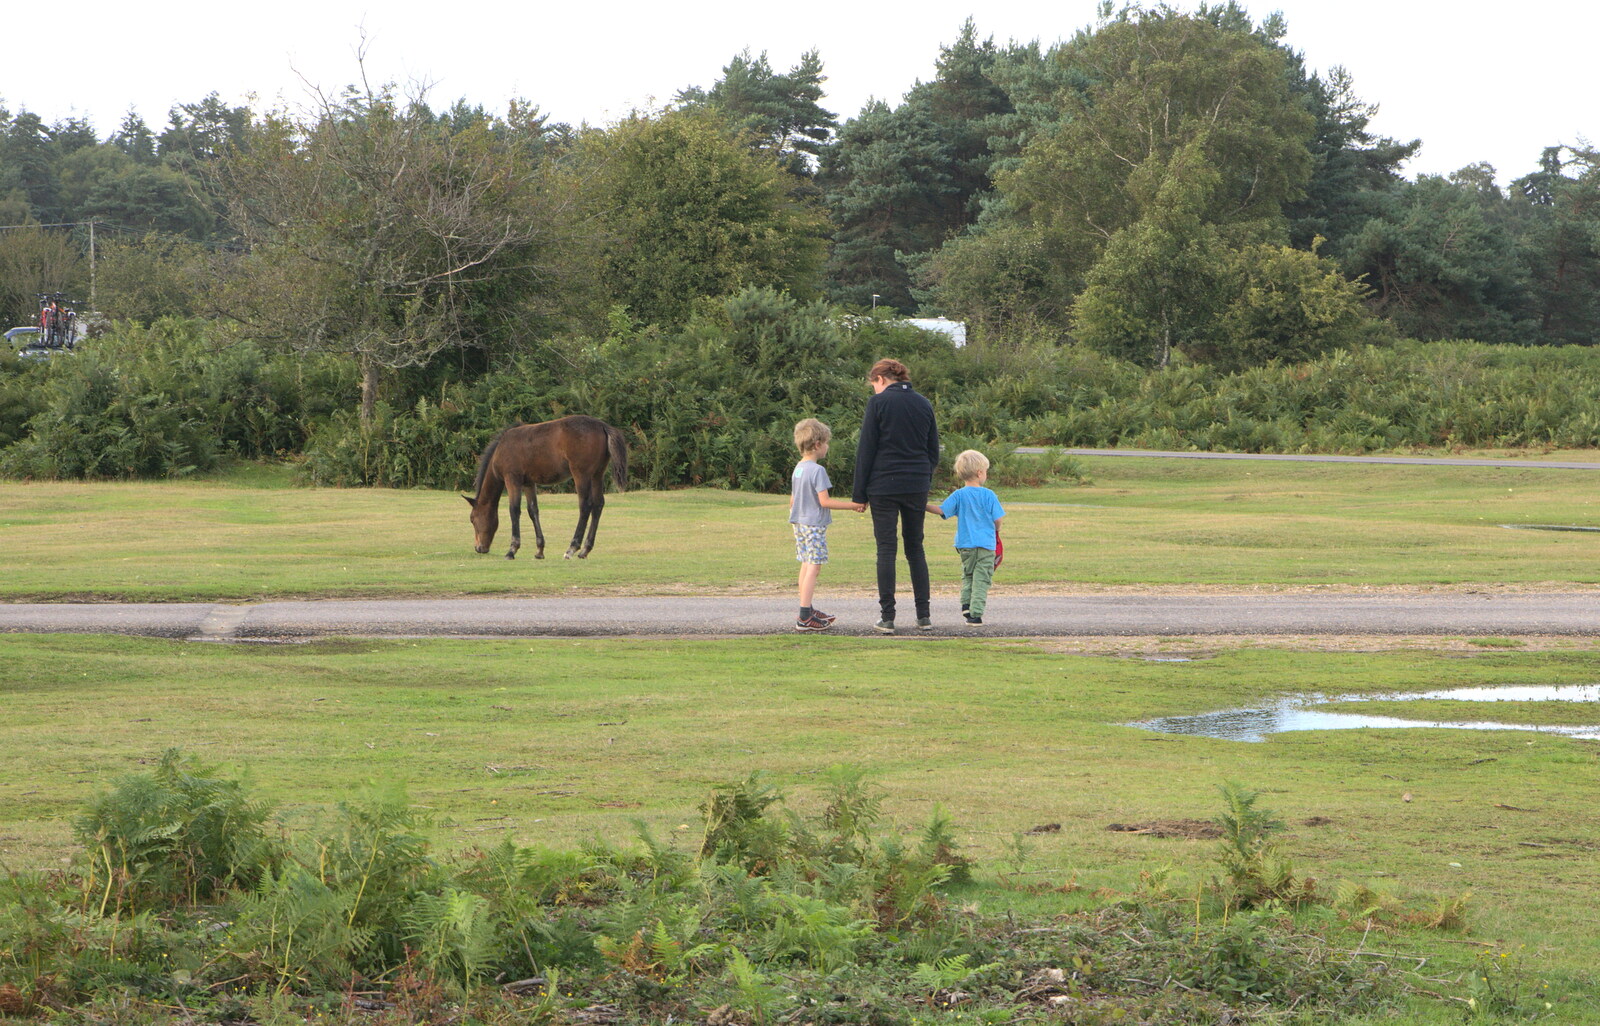 Isobel takes the boys to look at a pony from Camping at Roundhills, Brockenhurst, New Forest, Hampshire - 29th August 2015